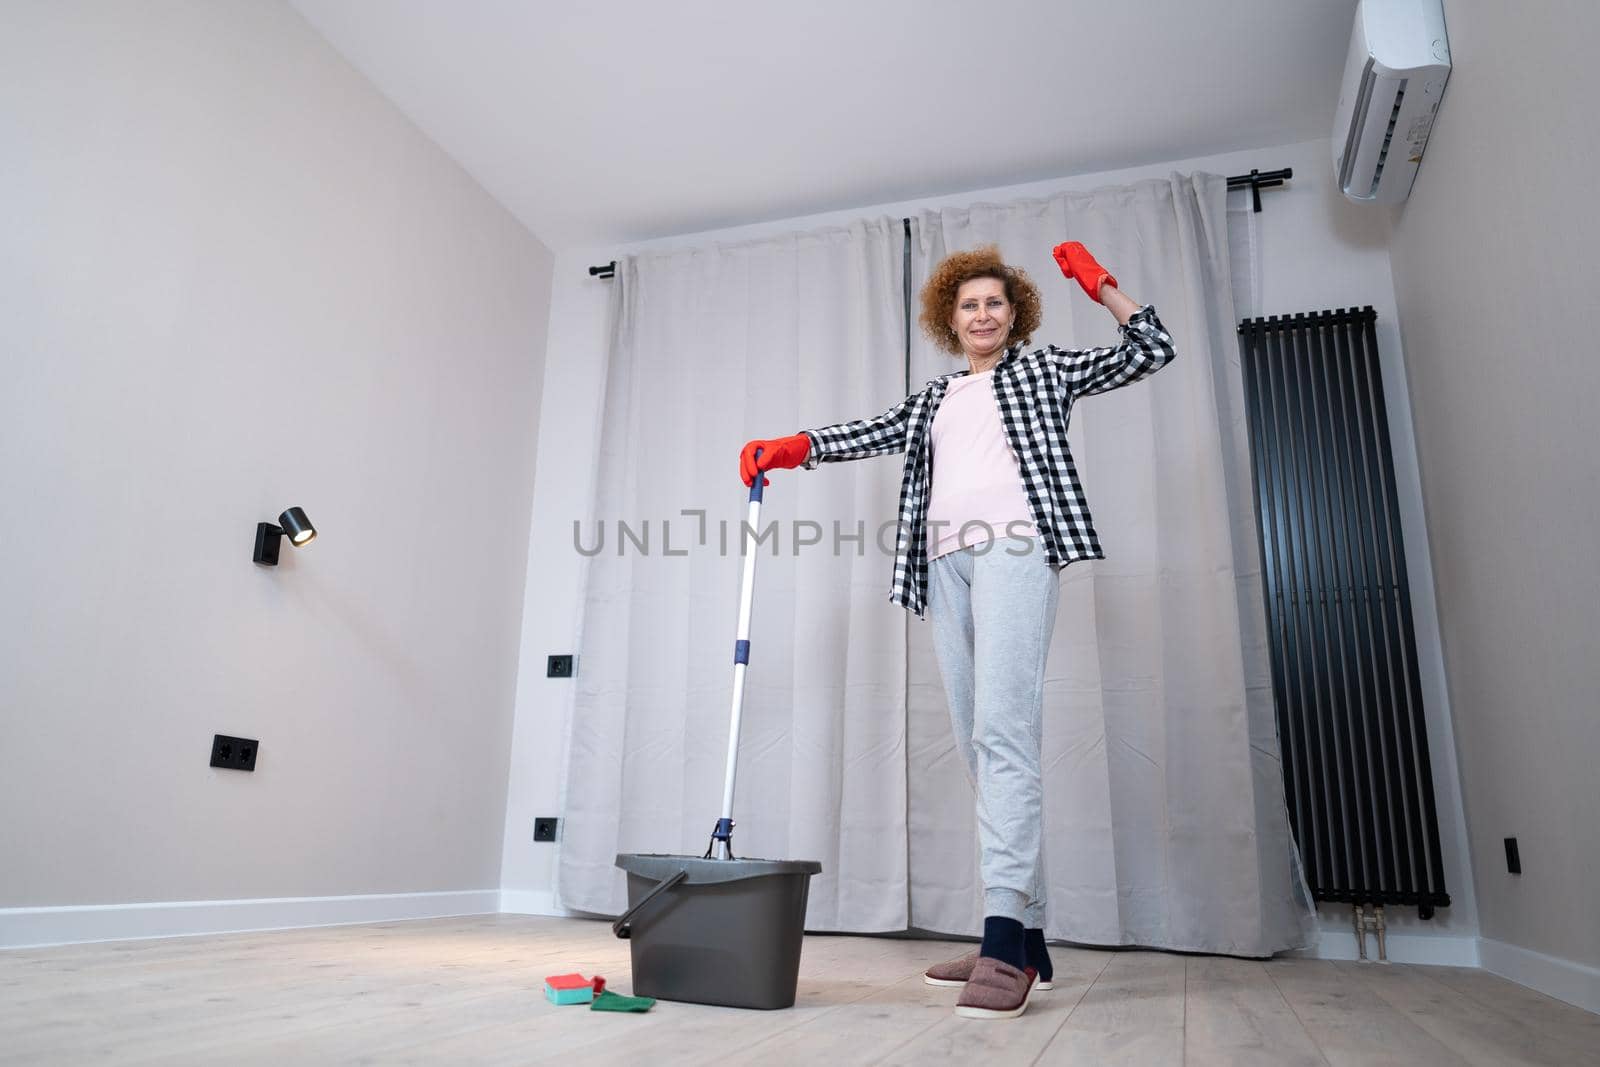 People, housework and housekeeping concept. Happy senior woman in protective gloves cleans floor and dances at home in empty apartment before moving to new home. Excited woman enjoying housekeeping.